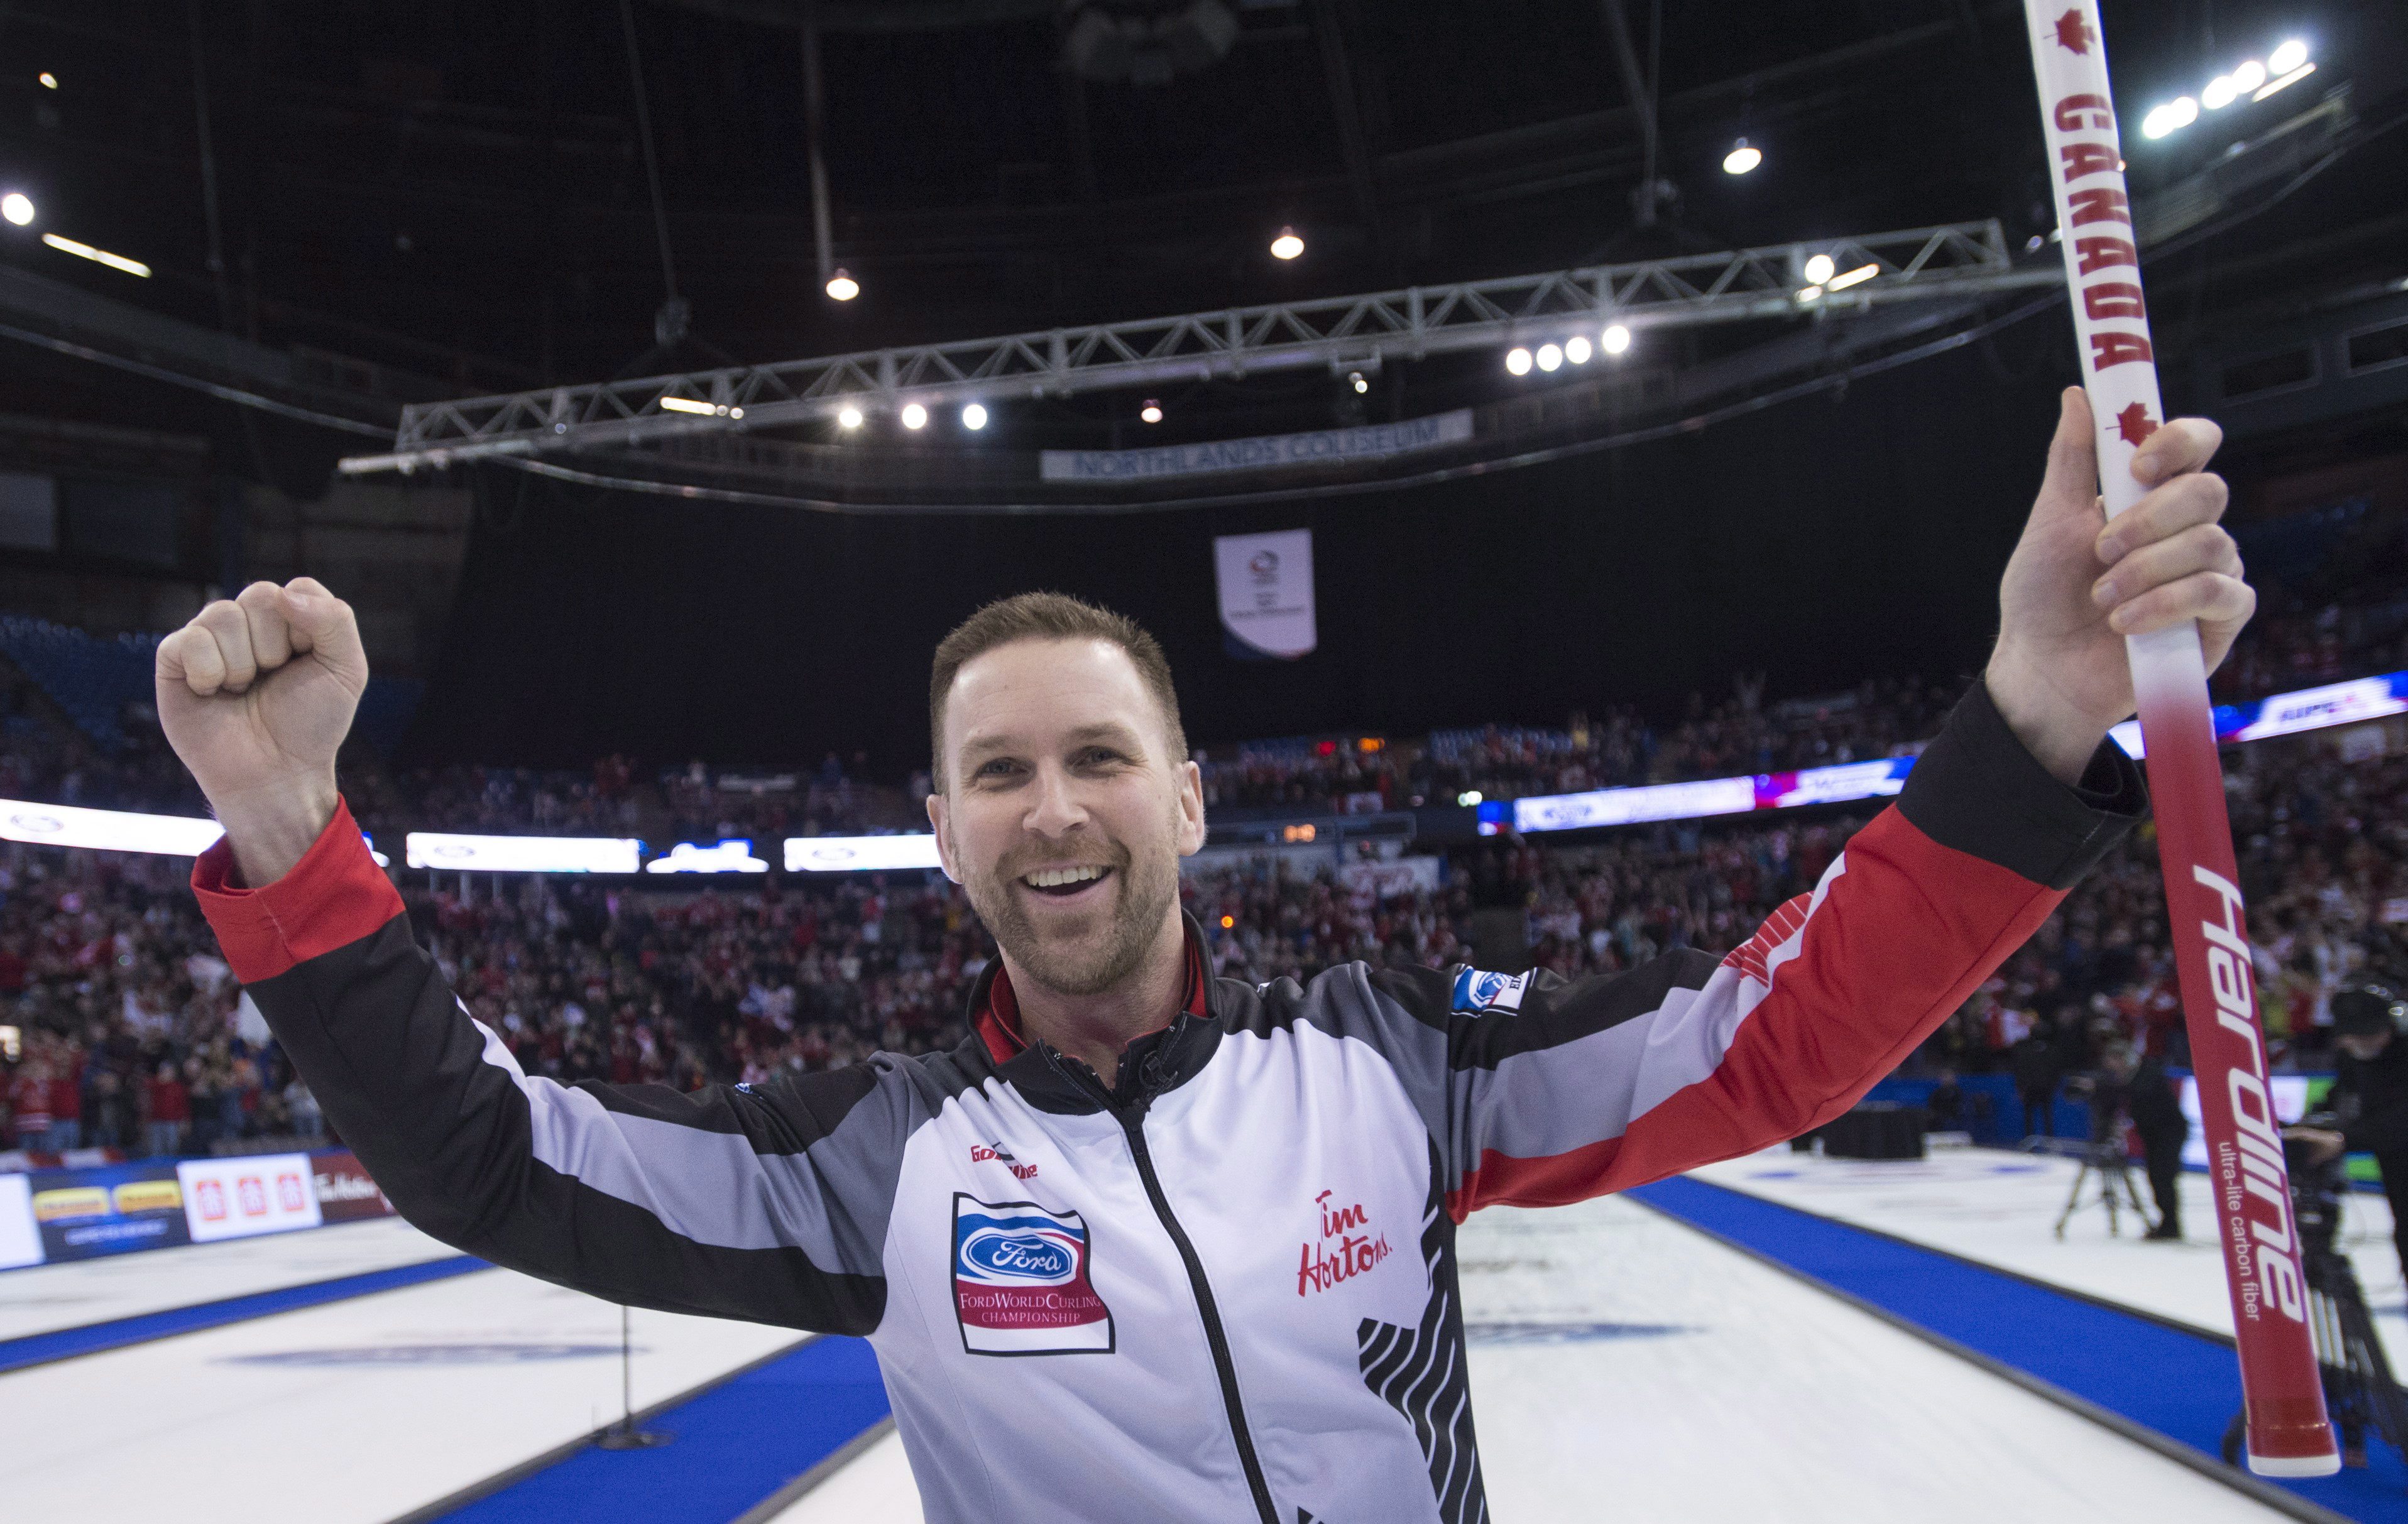 Undefeated Team Gushue golden at World Men's Curling Championship